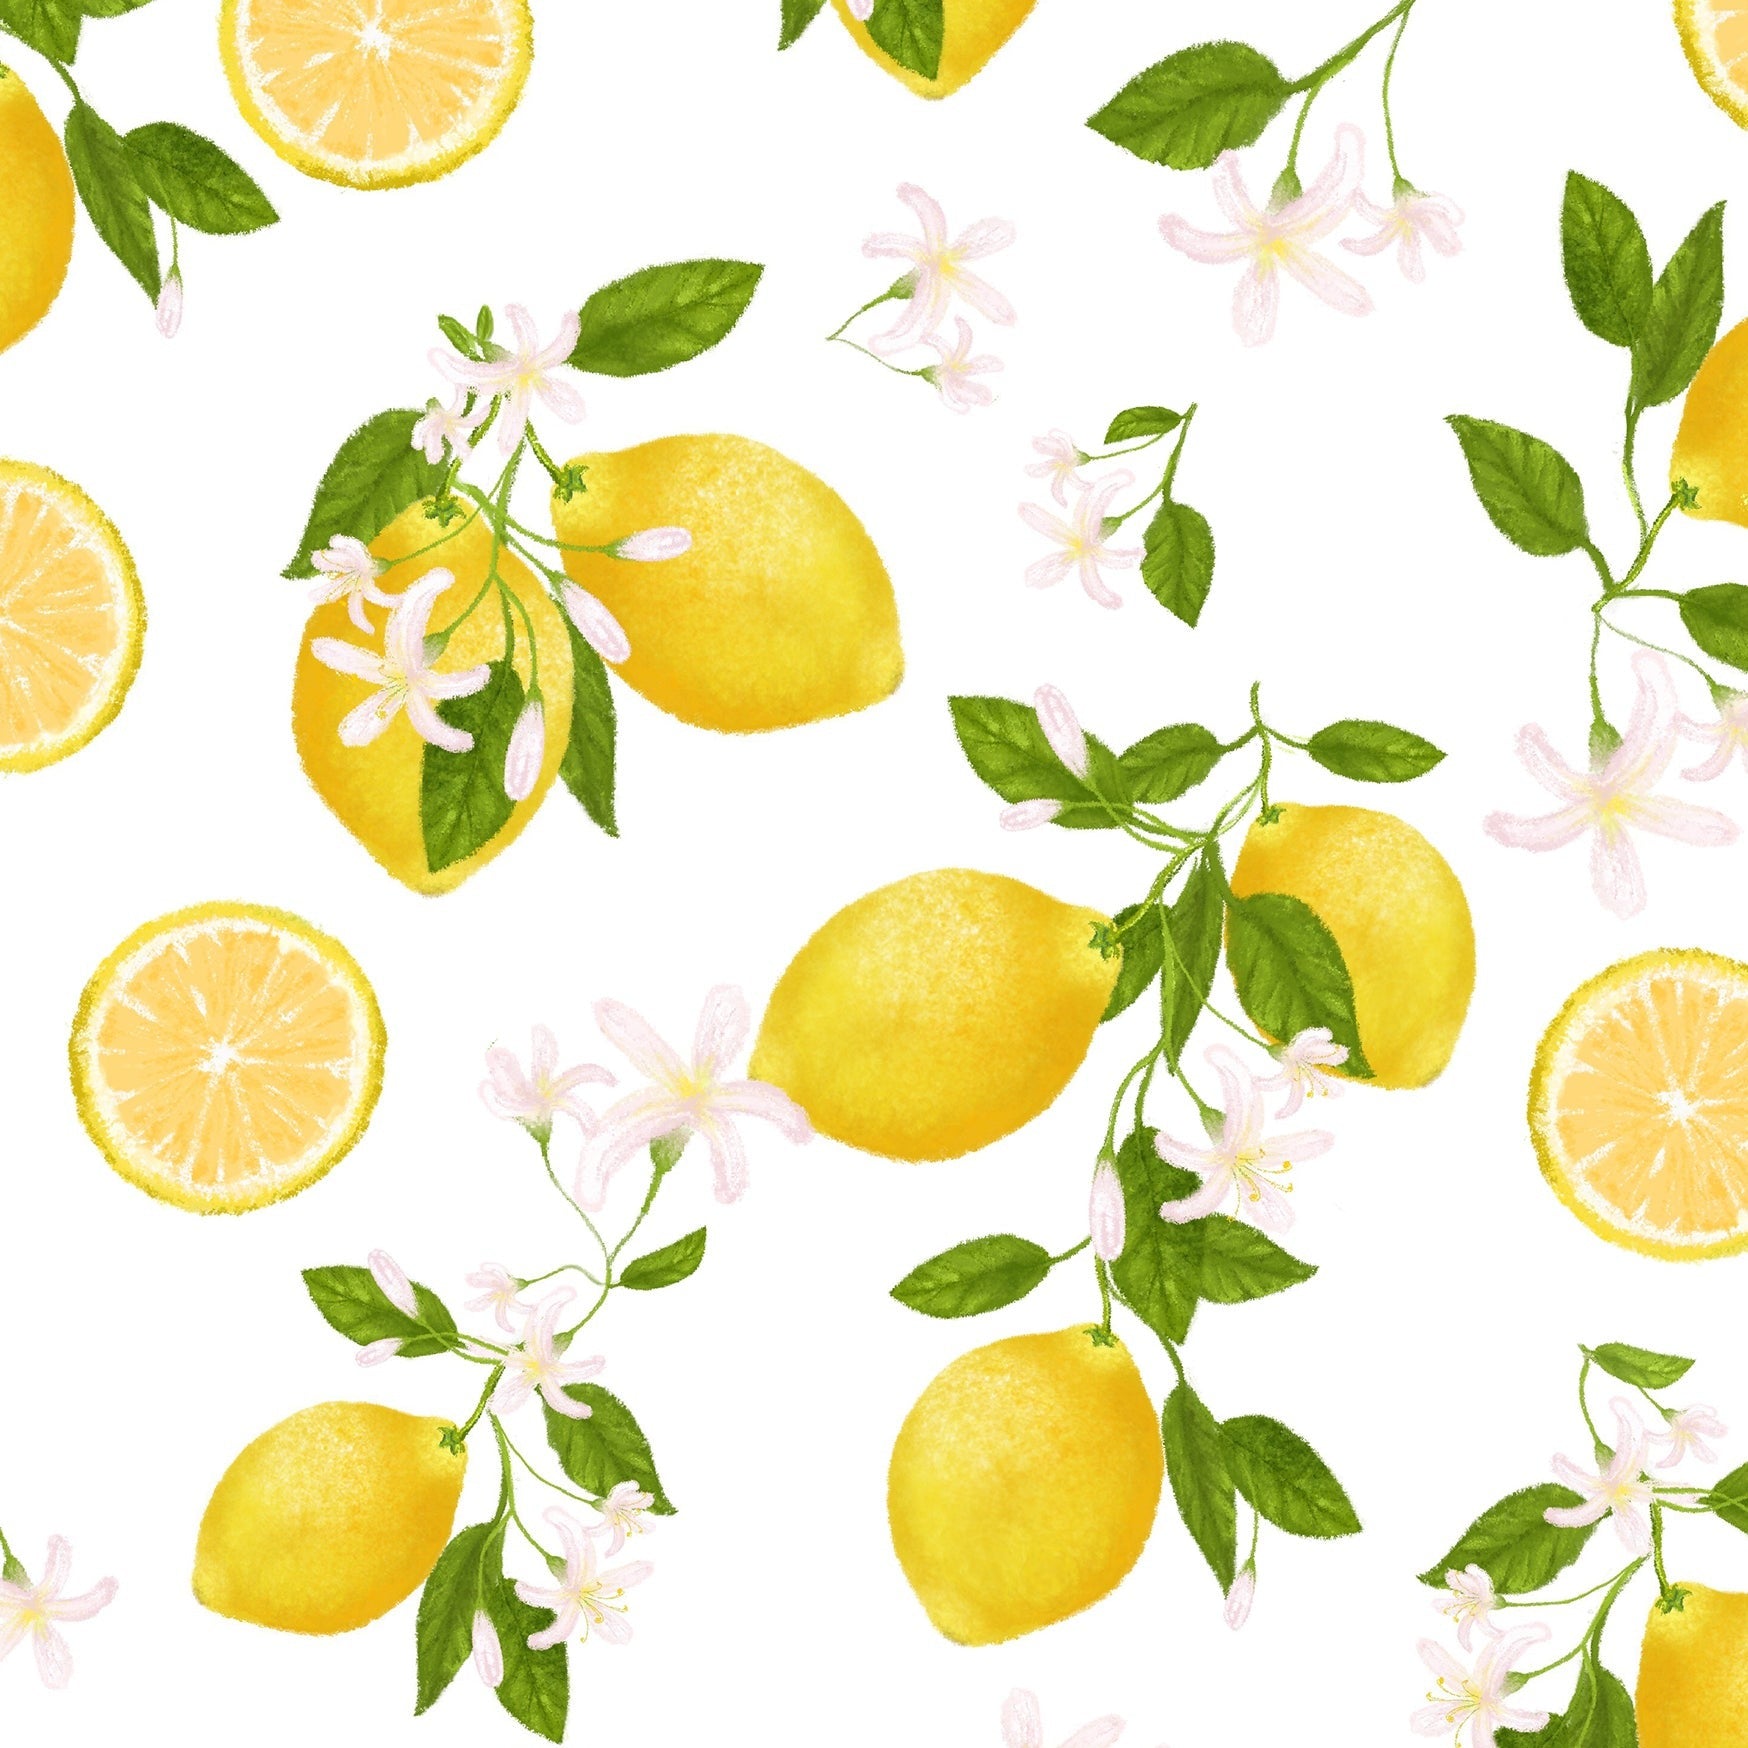 Close-up view of the Lemon Floral Wallpaper showcasing the detailed pattern of yellow lemons, green leaves, and white flowers on a white background